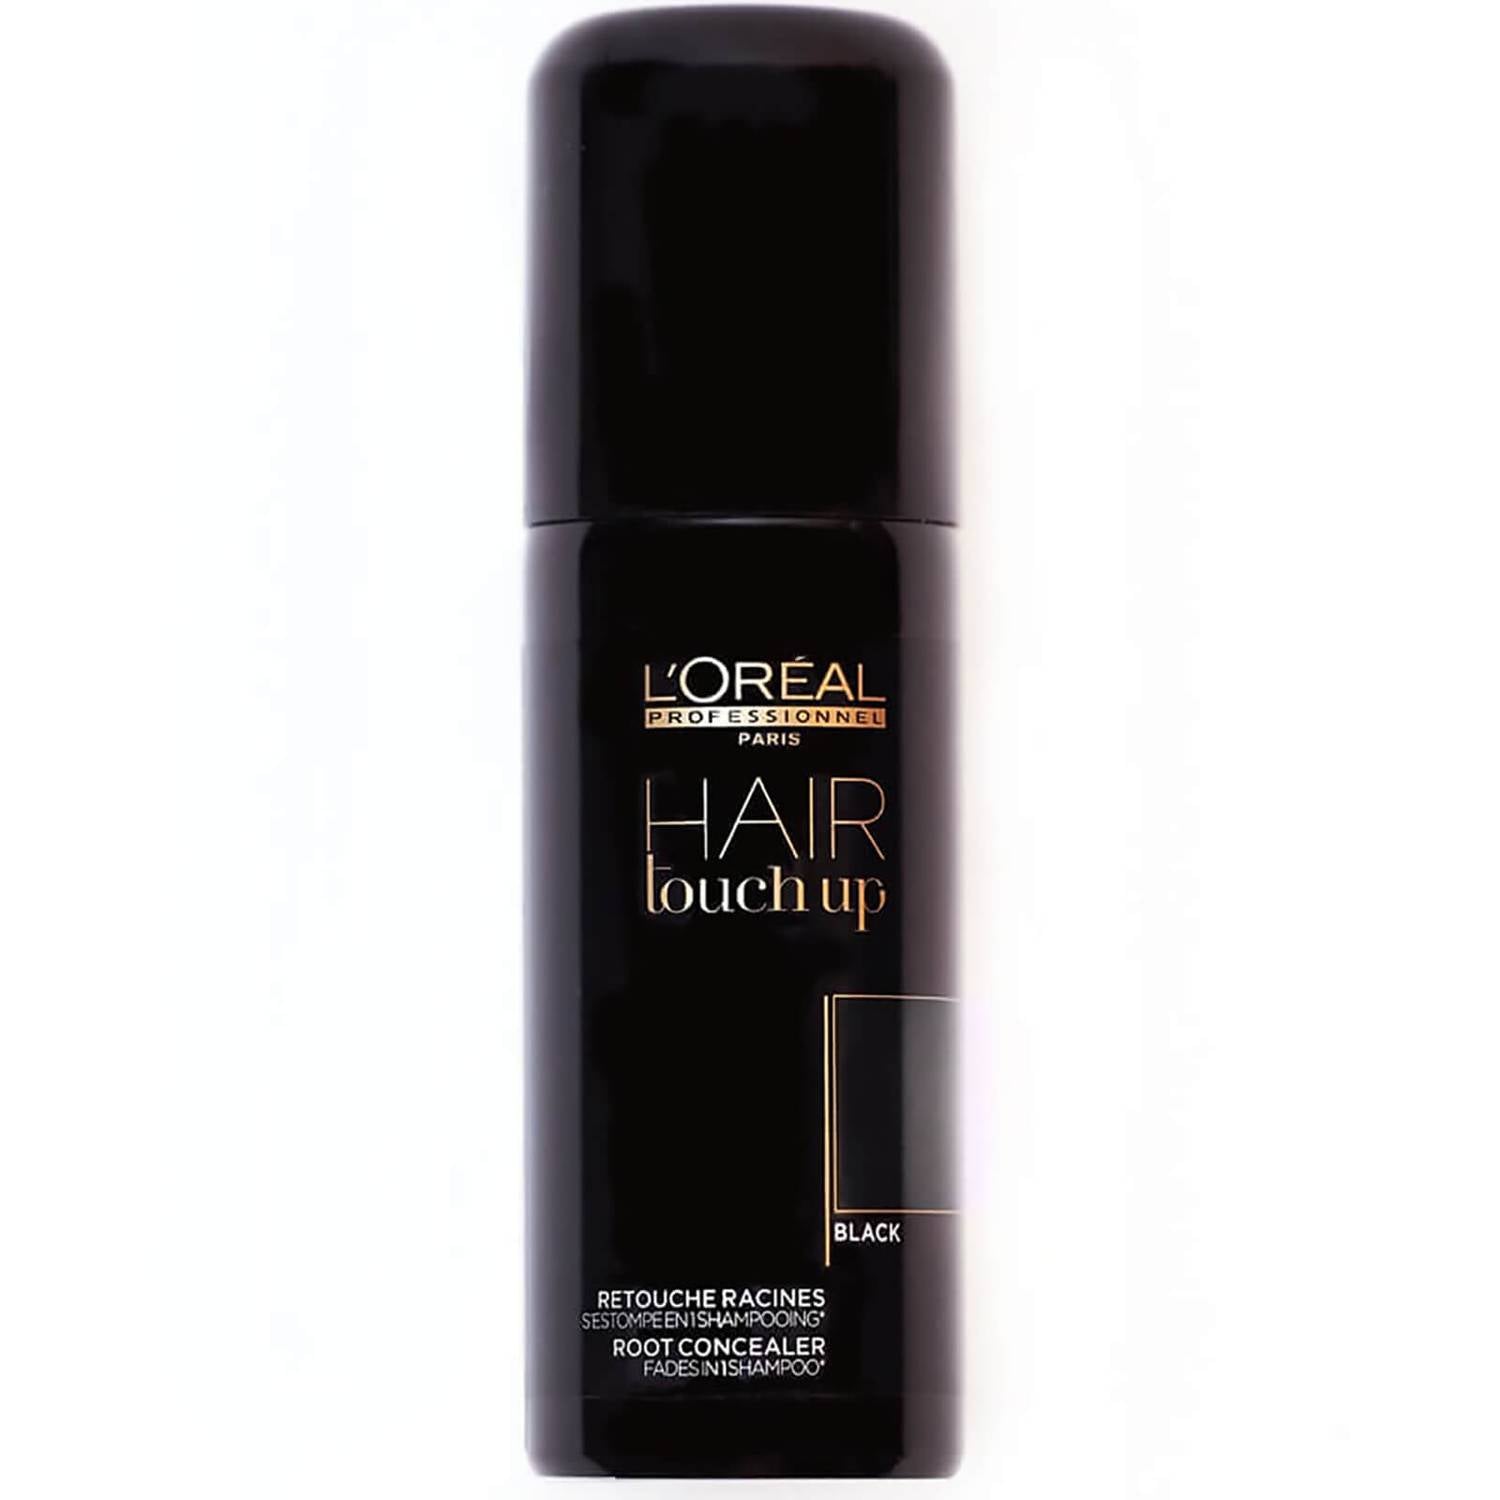 L'oreal Professionnel touch up